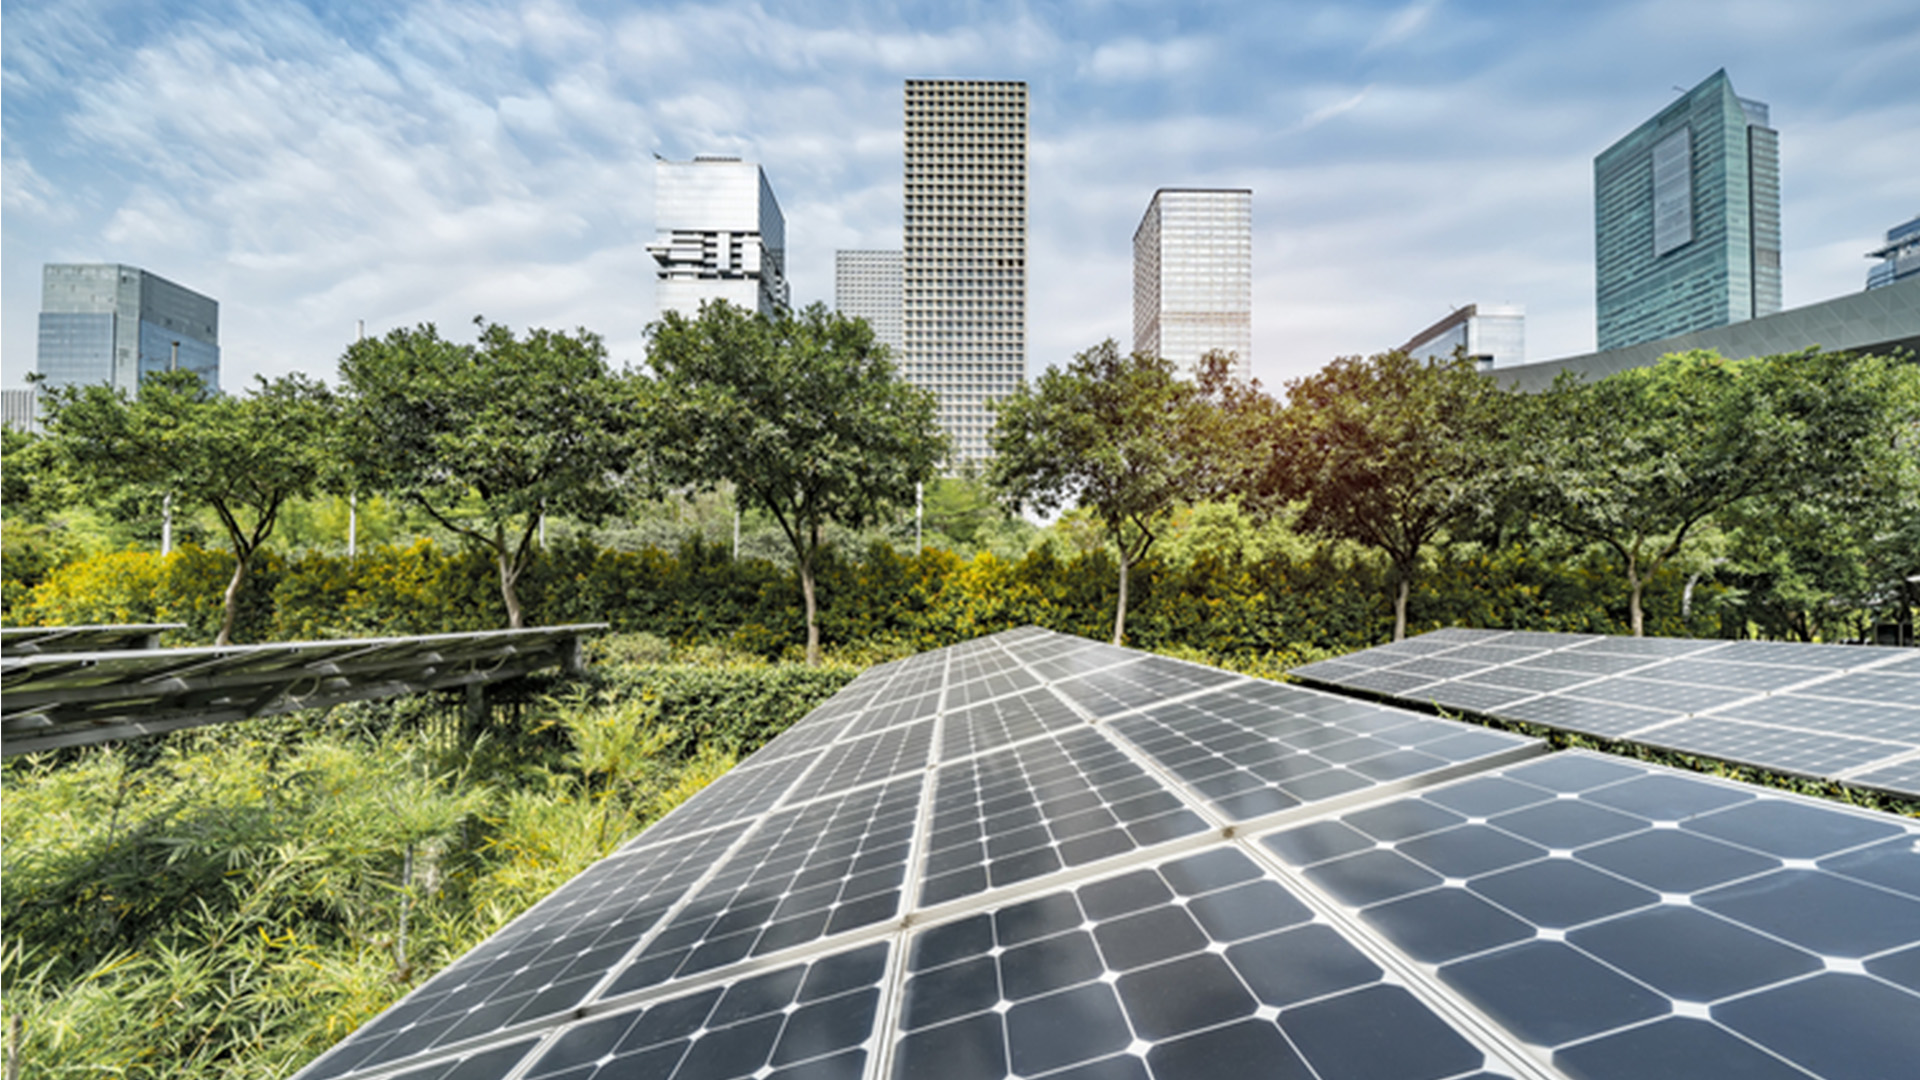 Achieving net-zero through corporate real estate investments